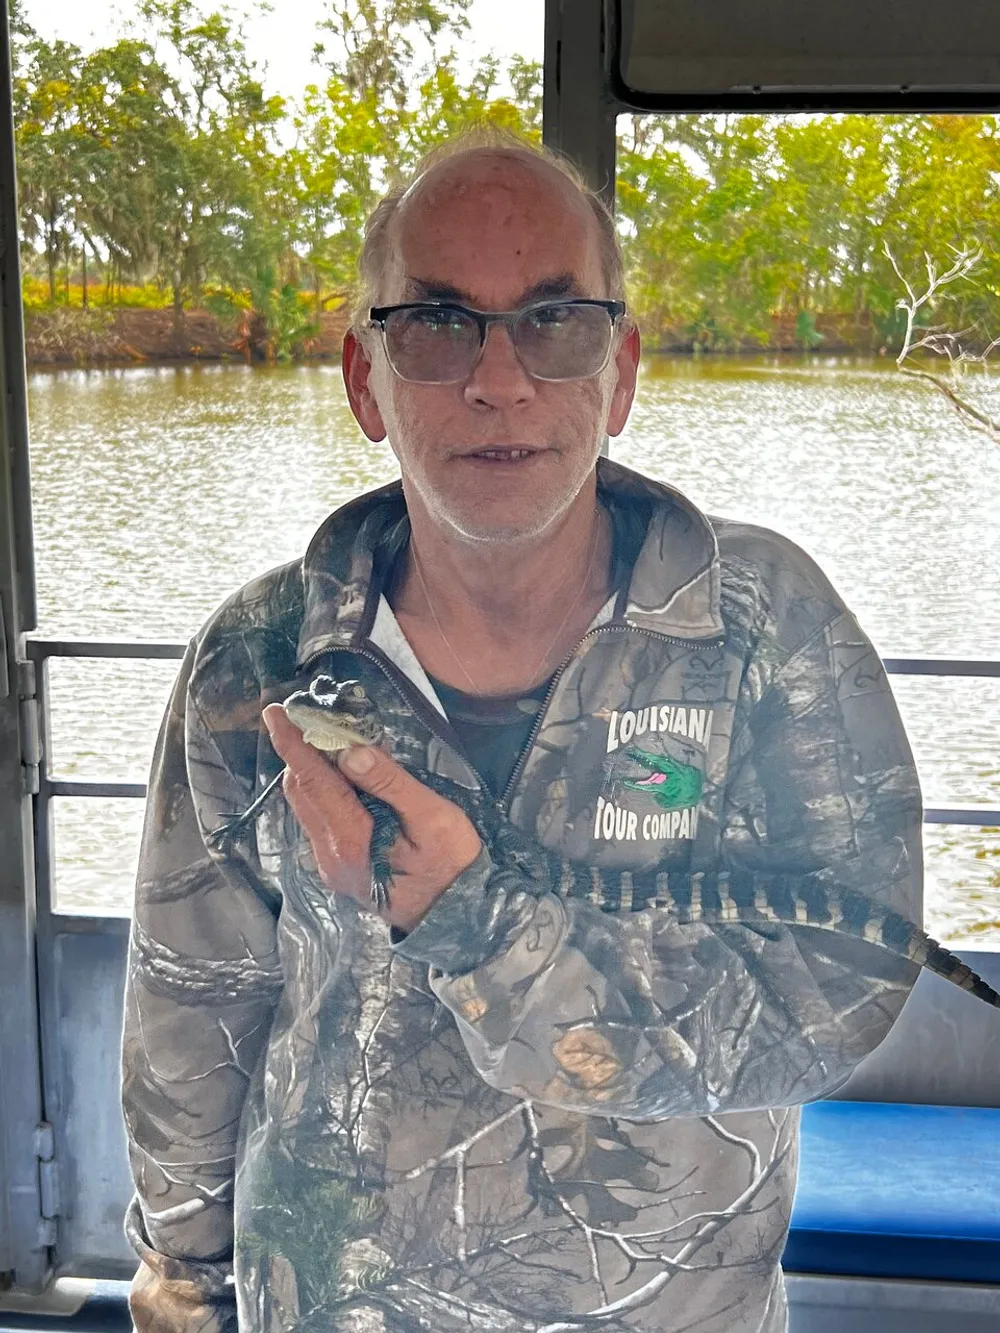 A person is holding a small alligator while wearing a camouflage jacket with Louisiana Tour Company text on it standing inside a boat with a river and trees visible in the background